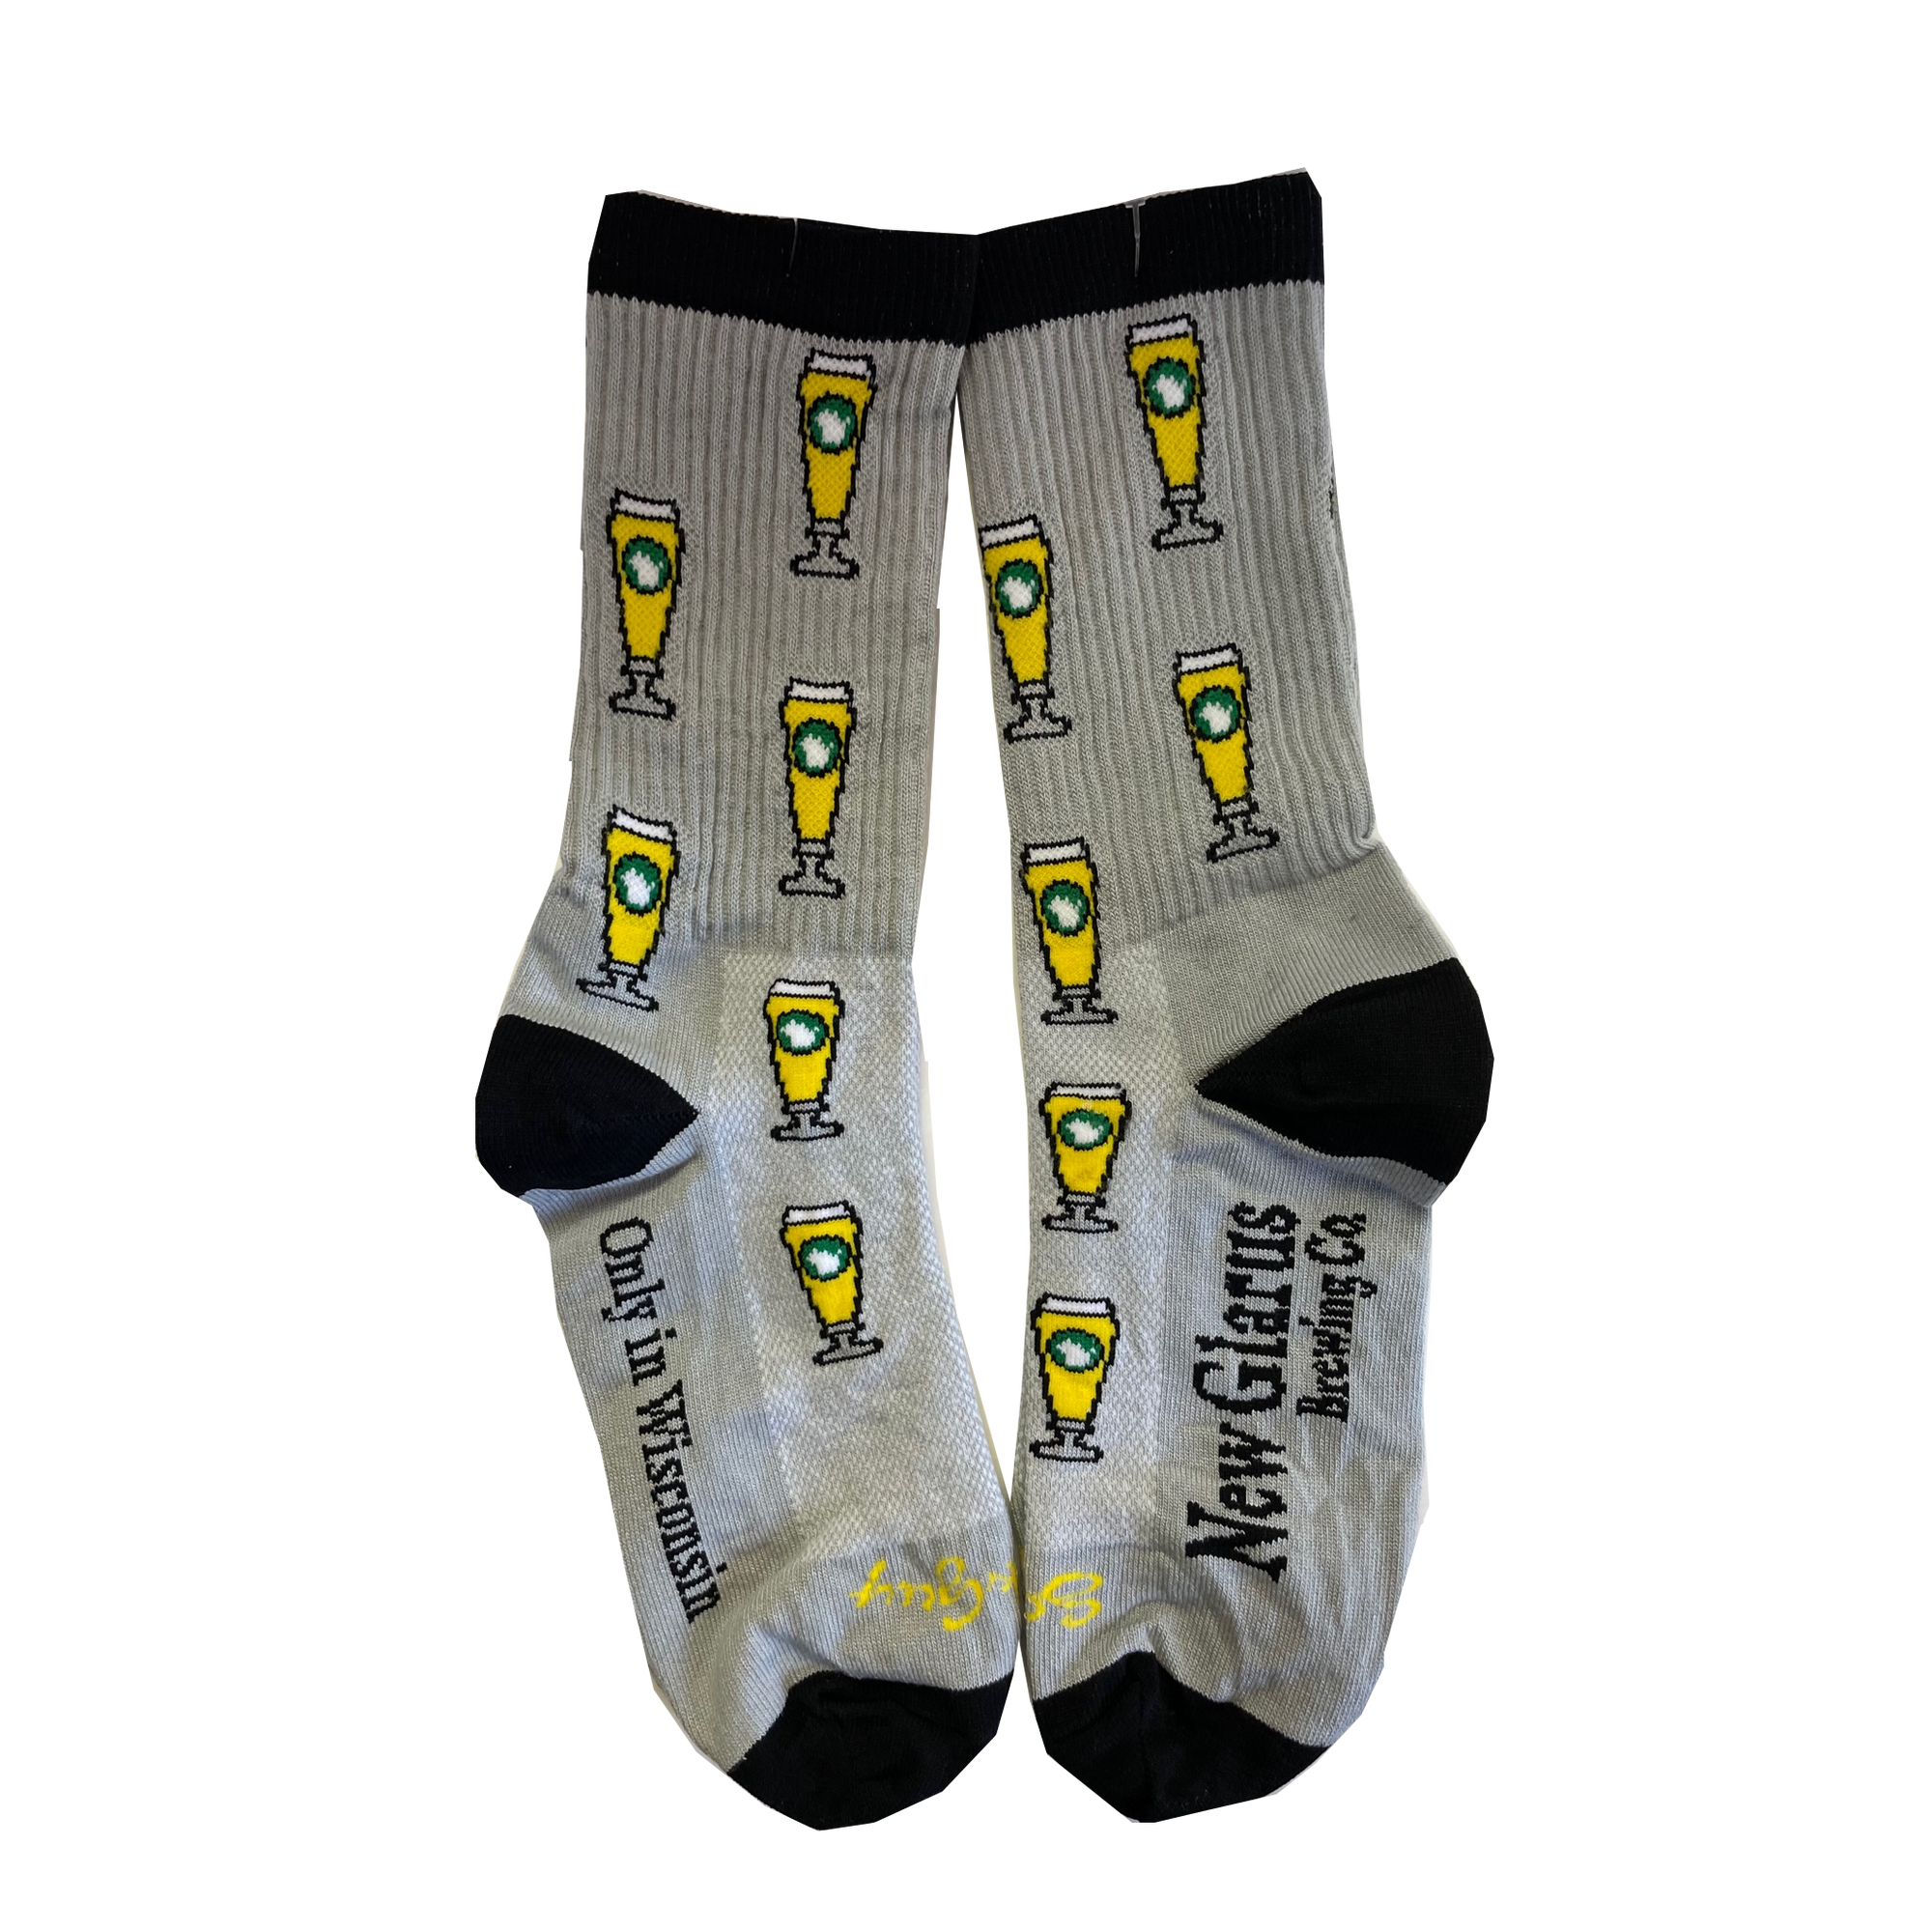 Light gray socks with small yellow pilsner glasses. Features black toe, heel and top band.